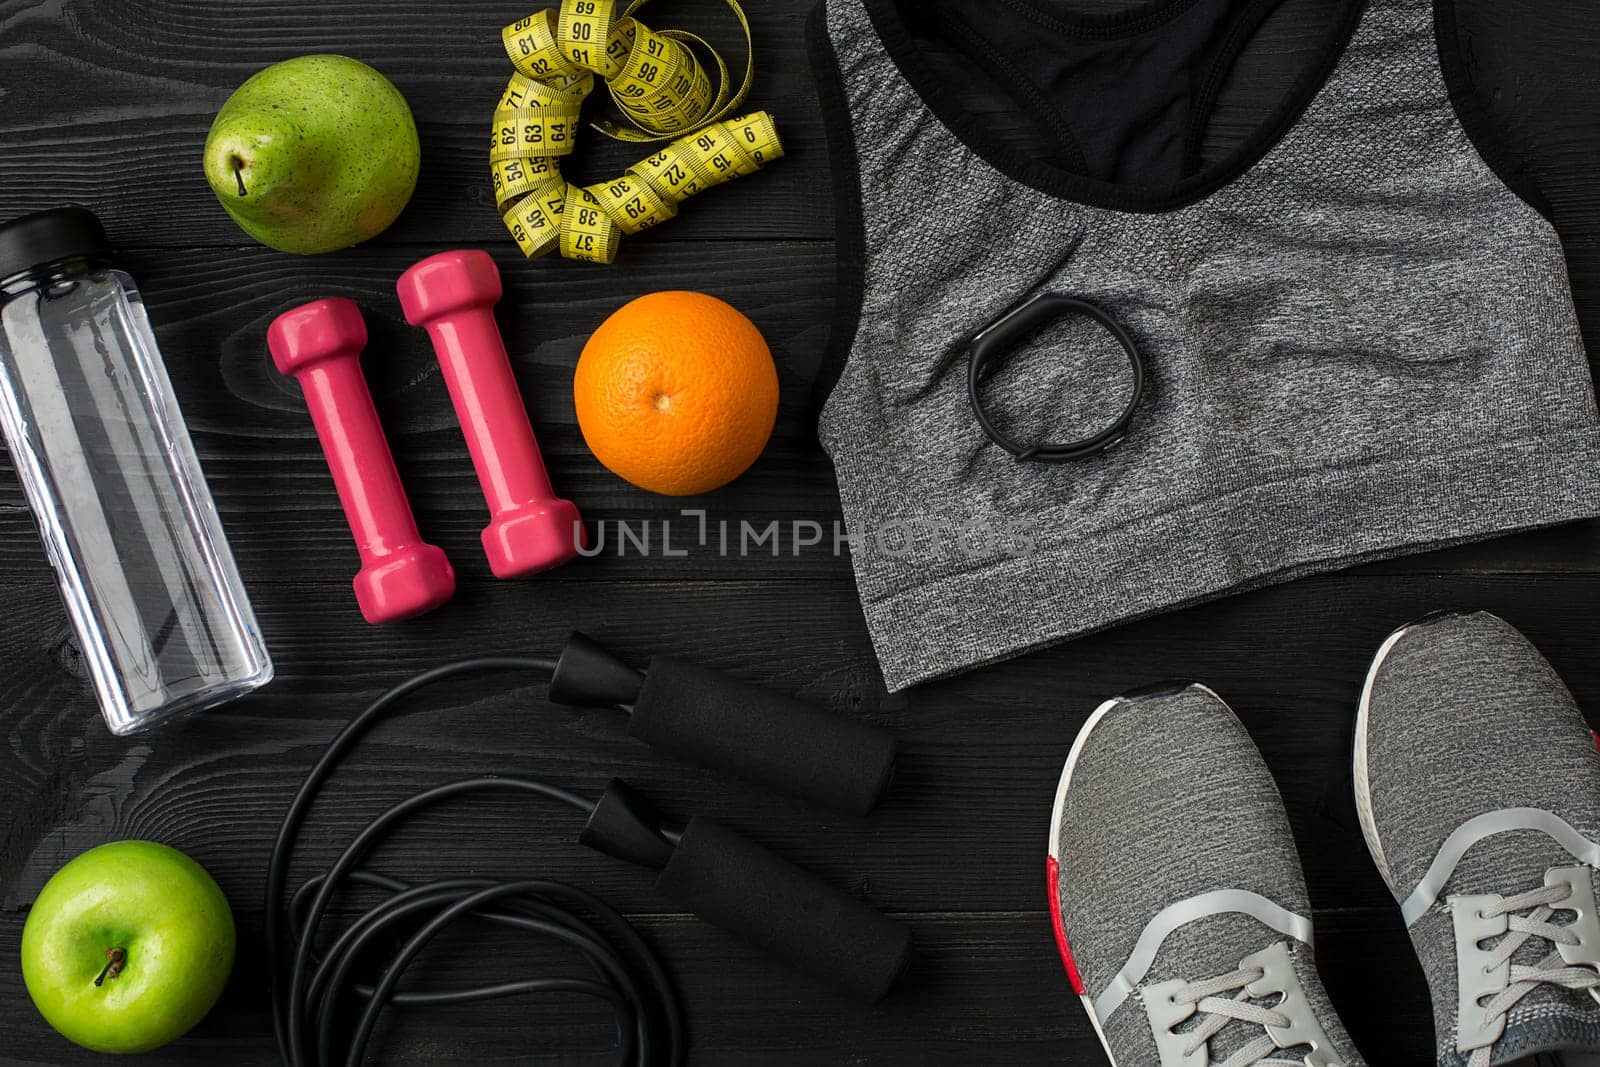 Athlete's set with female clothing, sneakers and bottle of water on dark background. Top view. Copy space. Still life. Ideal for sporty blog.